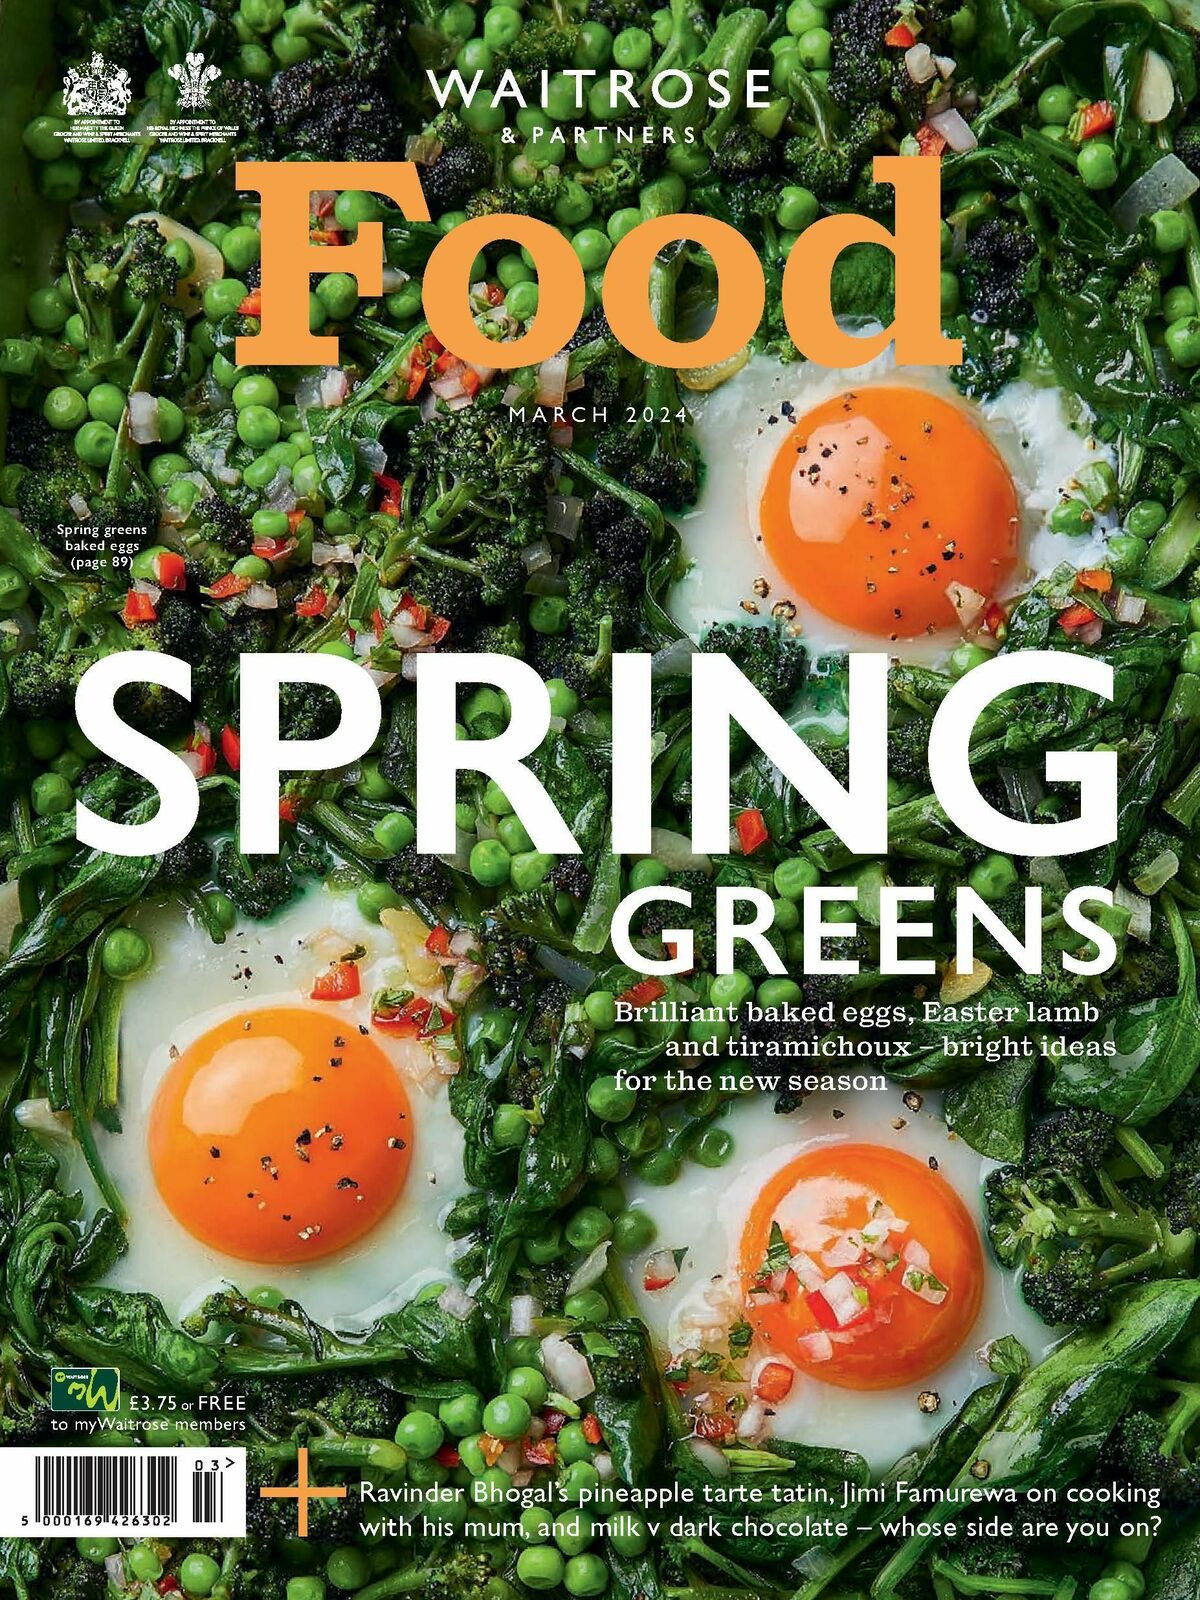 Waitrose Food Magazine March Offers from 1 March